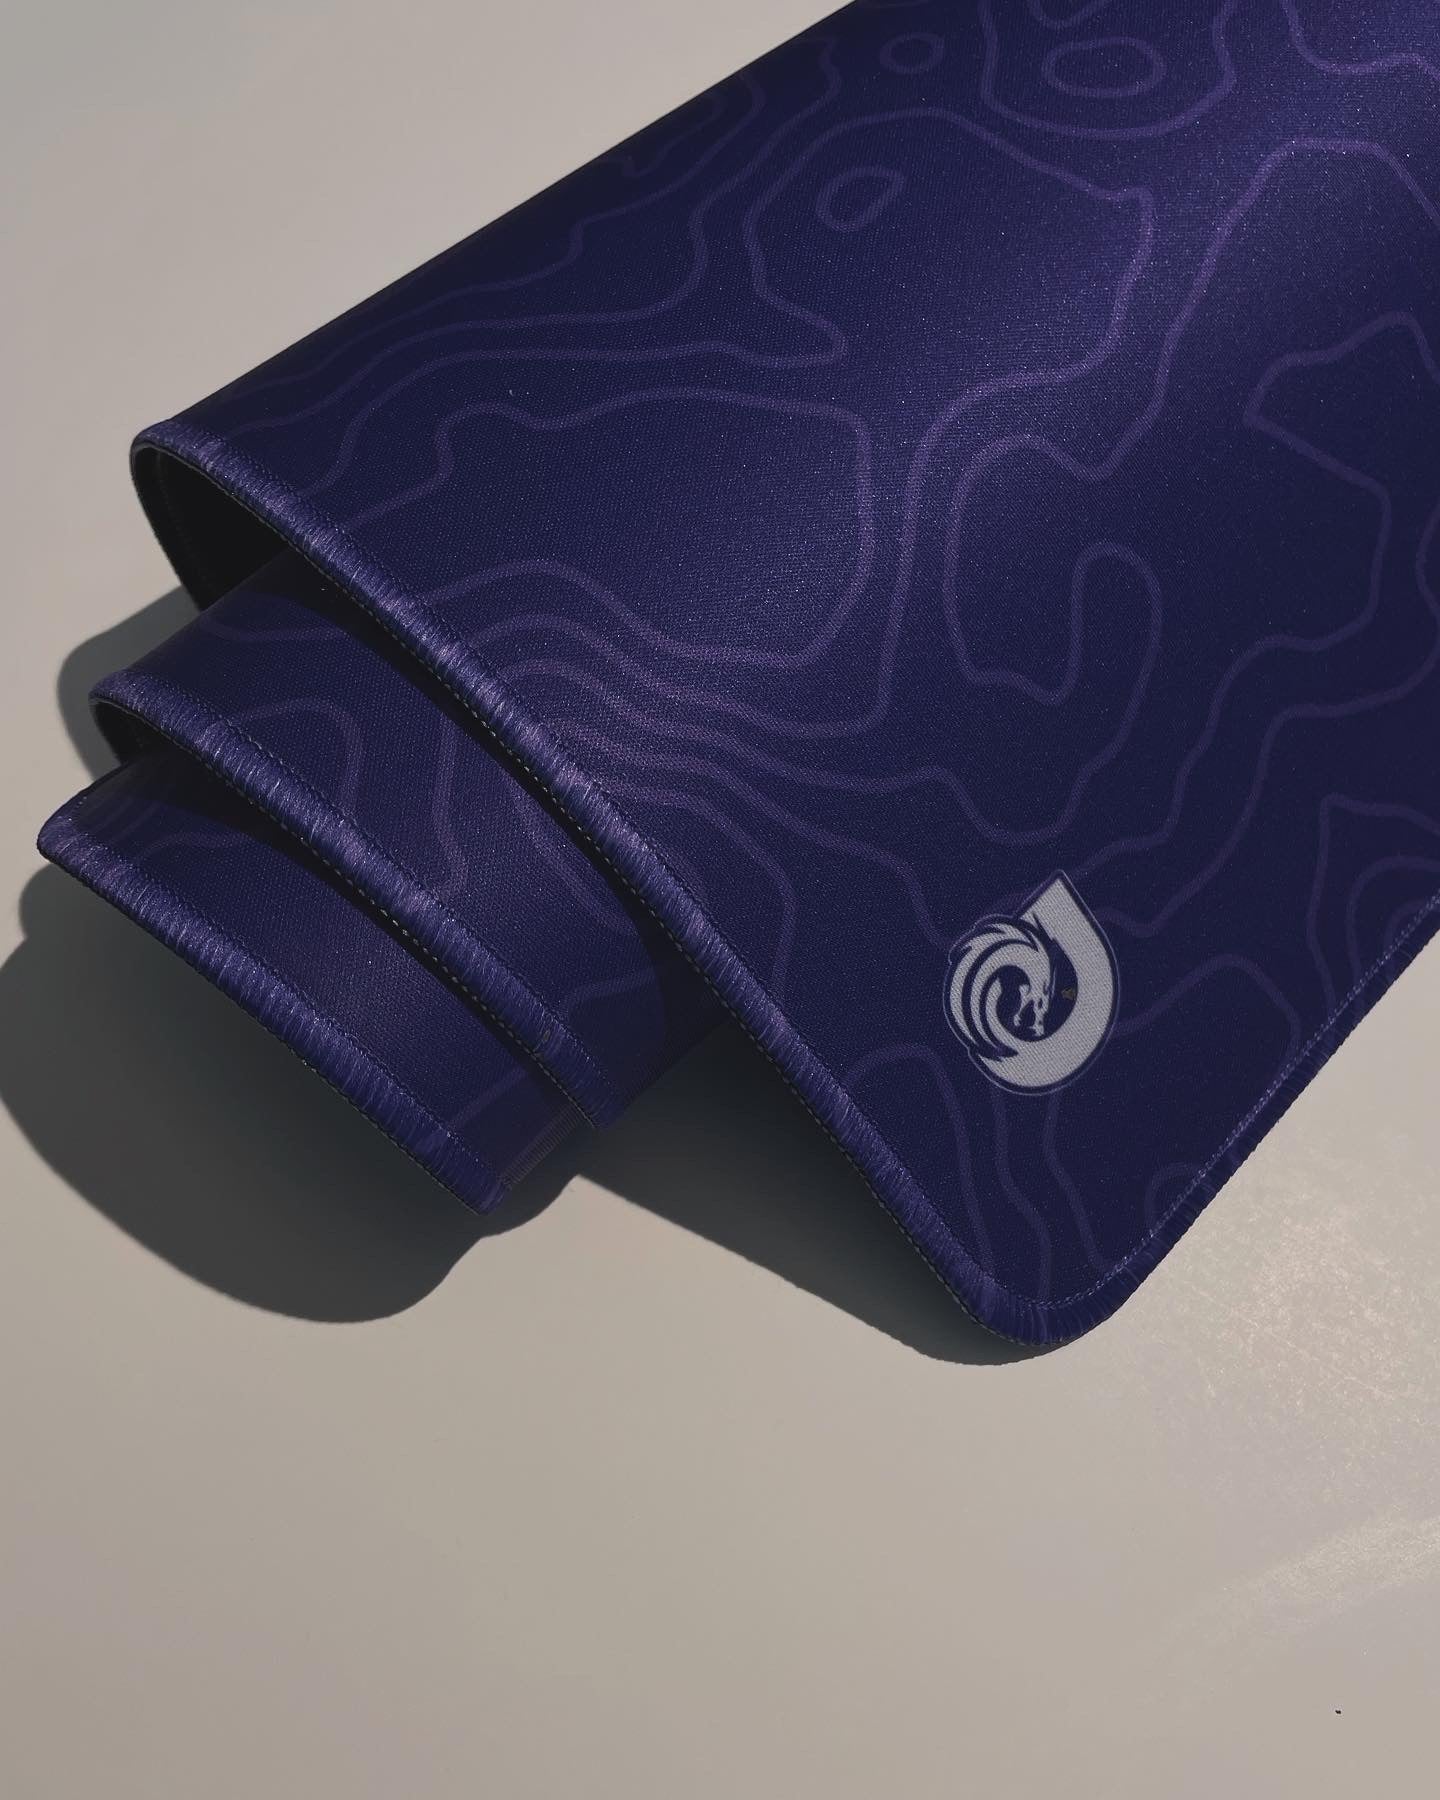 Large Gaming Mouse Pad - Purple